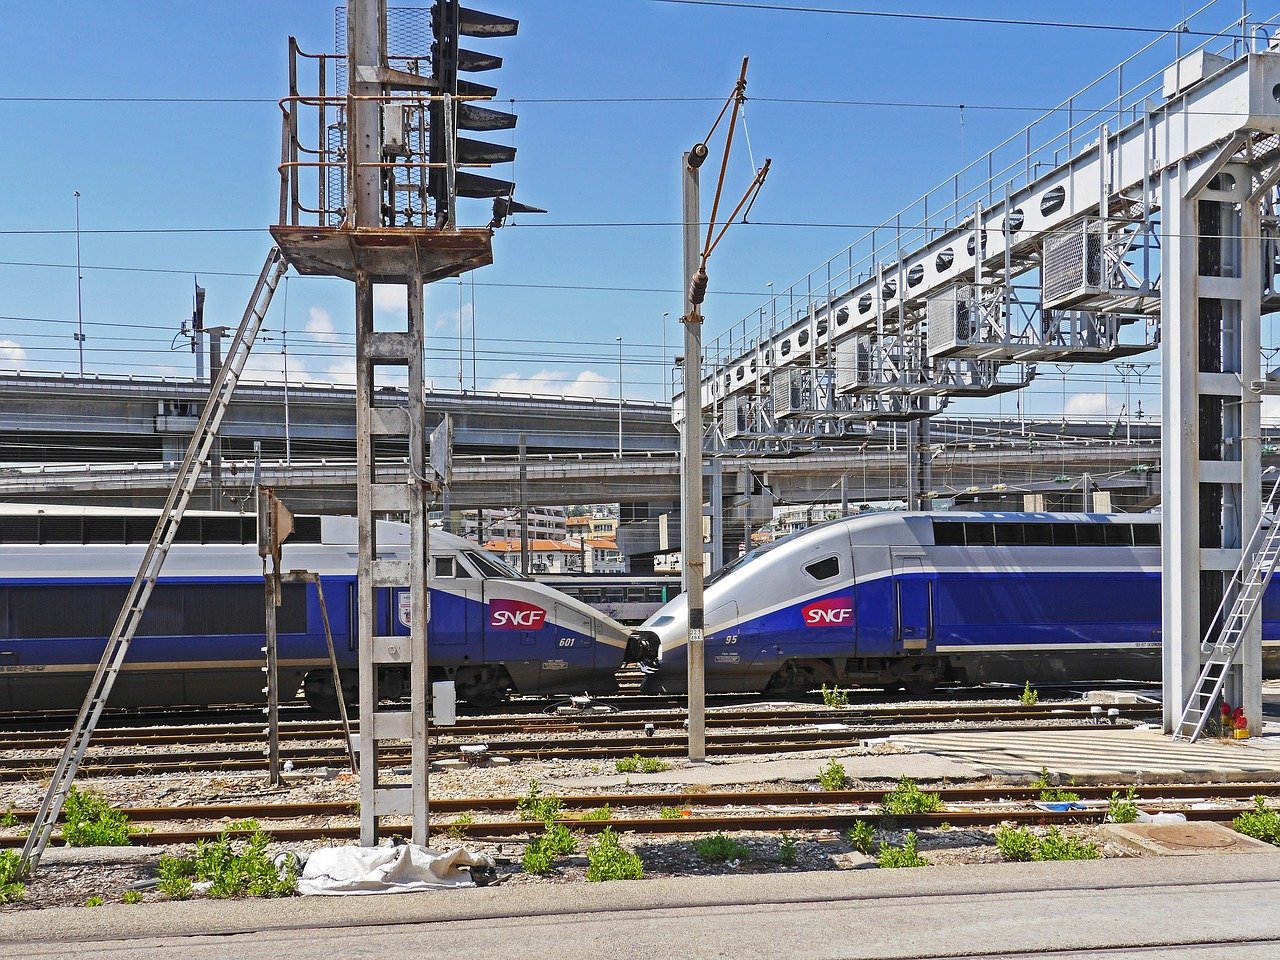 How To Get from Gare de Lyon to Charles de Gaulle